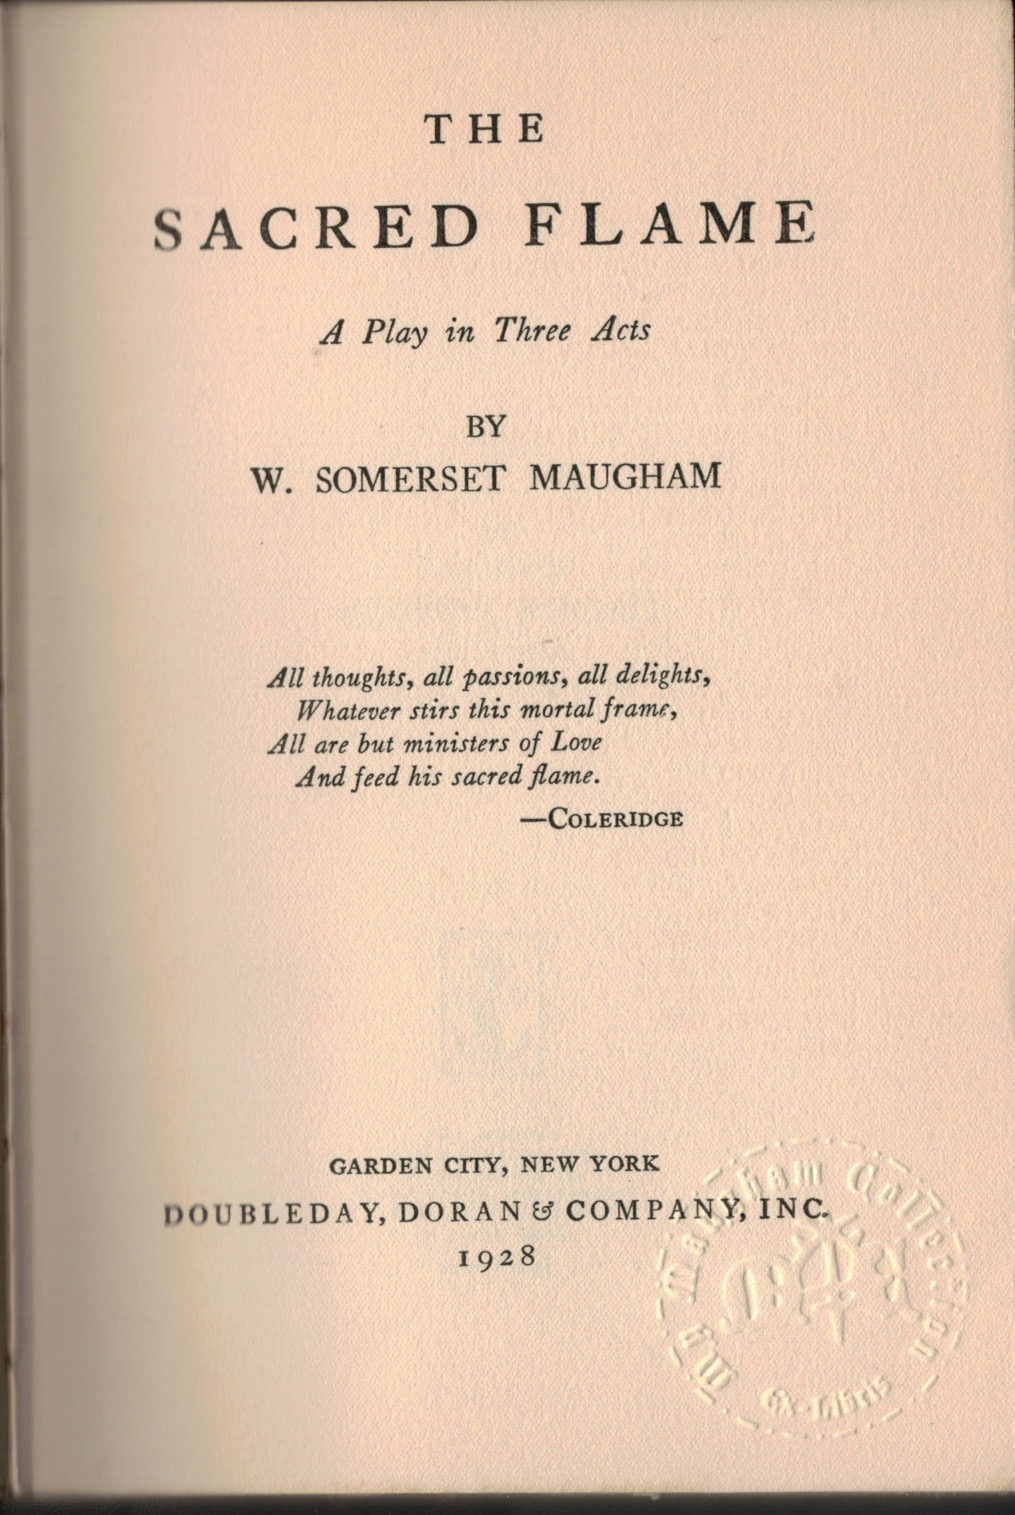 title page of The Sacred Flame 1928